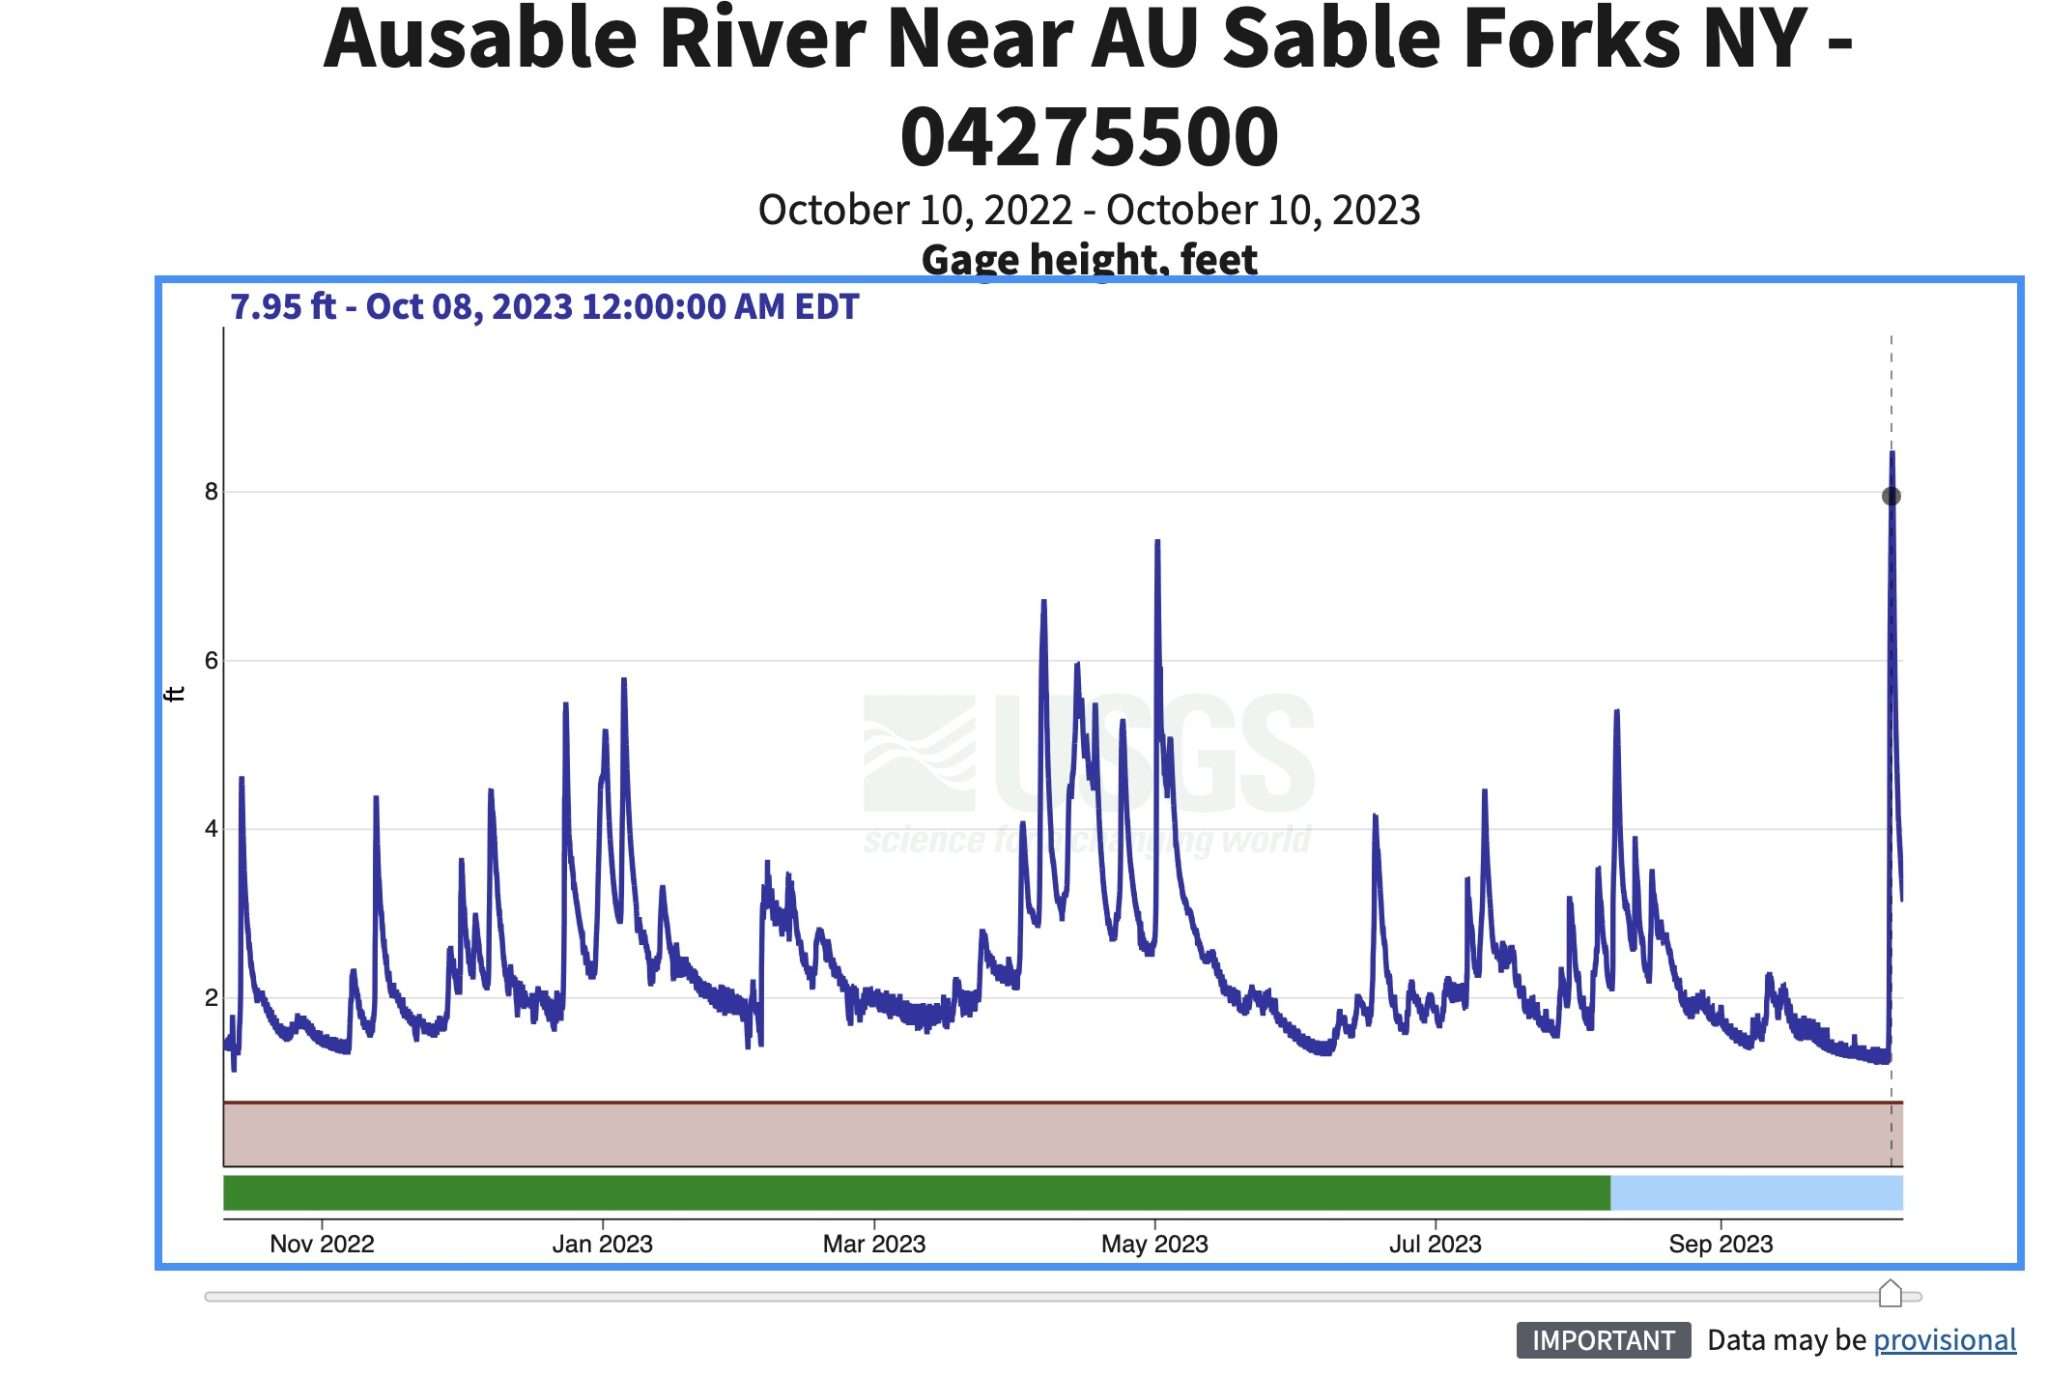 This graph shows Ausable River levels over the past year, including a spike caused by rainfall this weekend. Snapshot from United States Geological Survey site